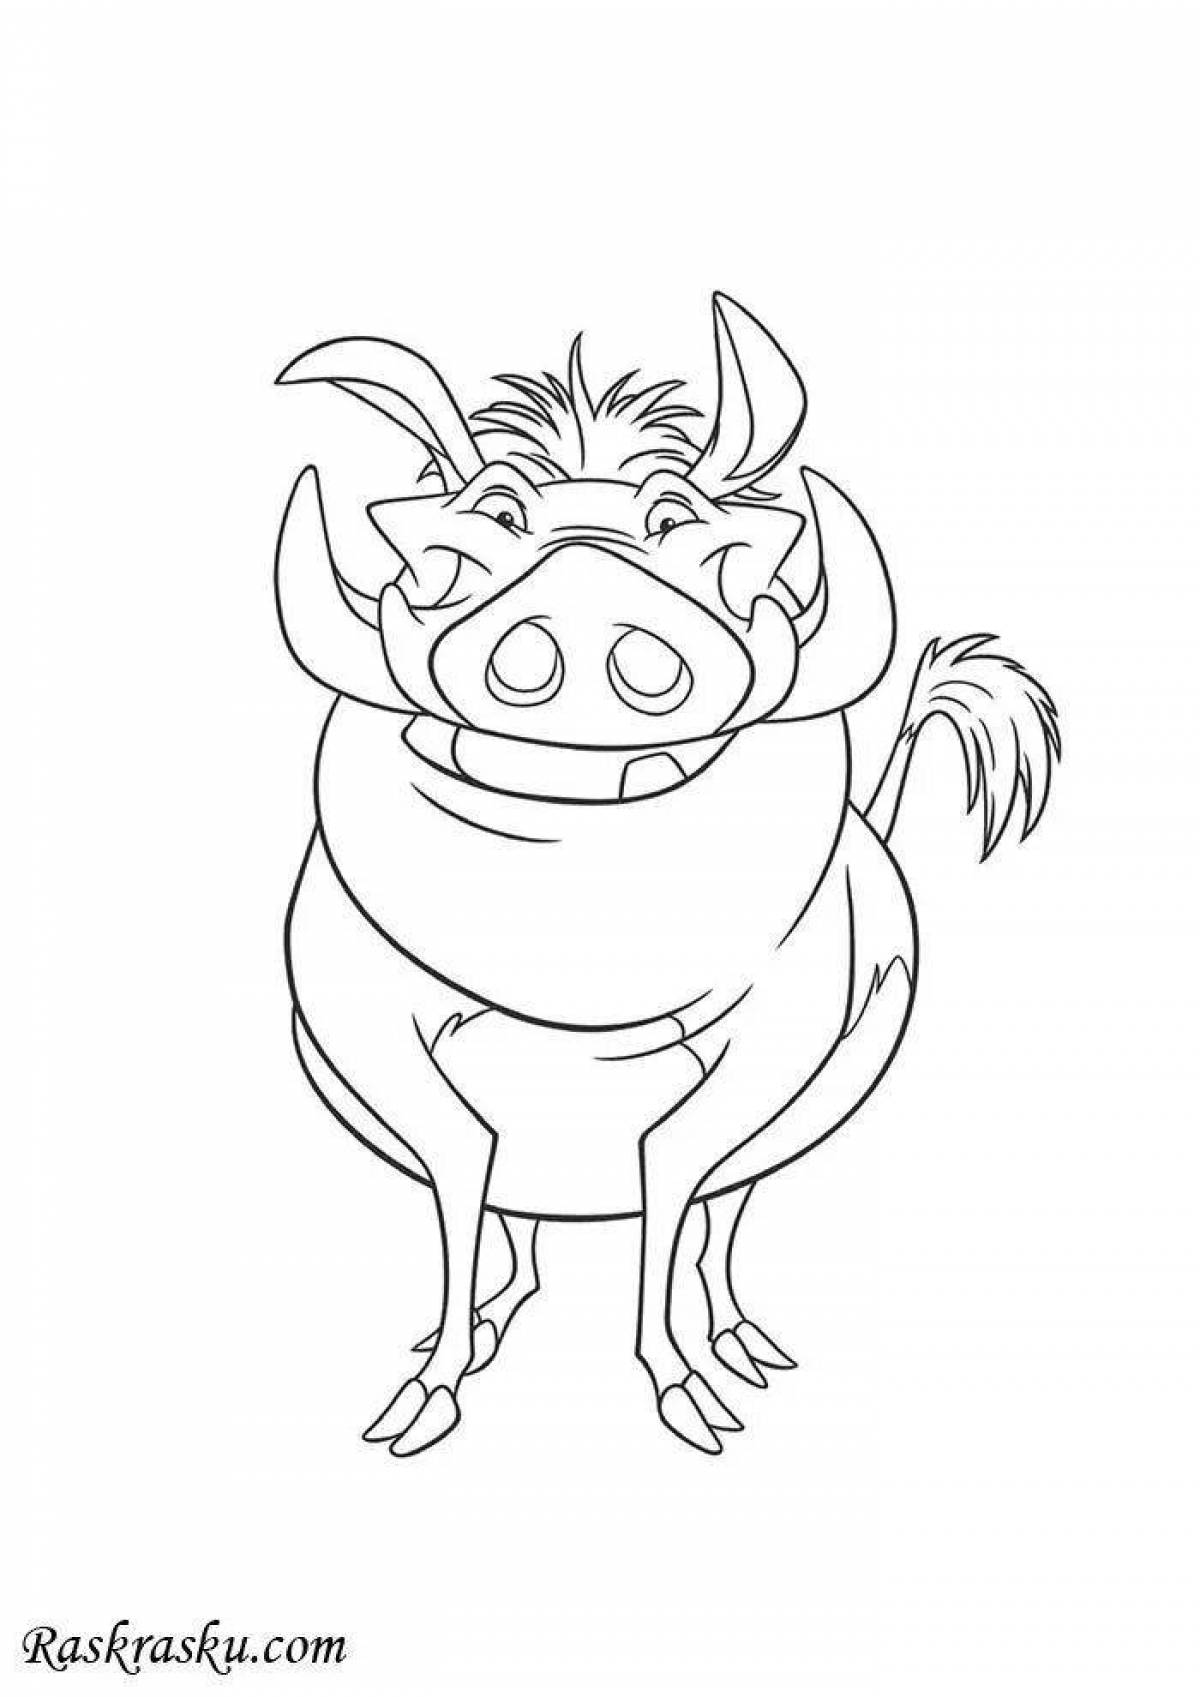 Colorful pumba coloring page